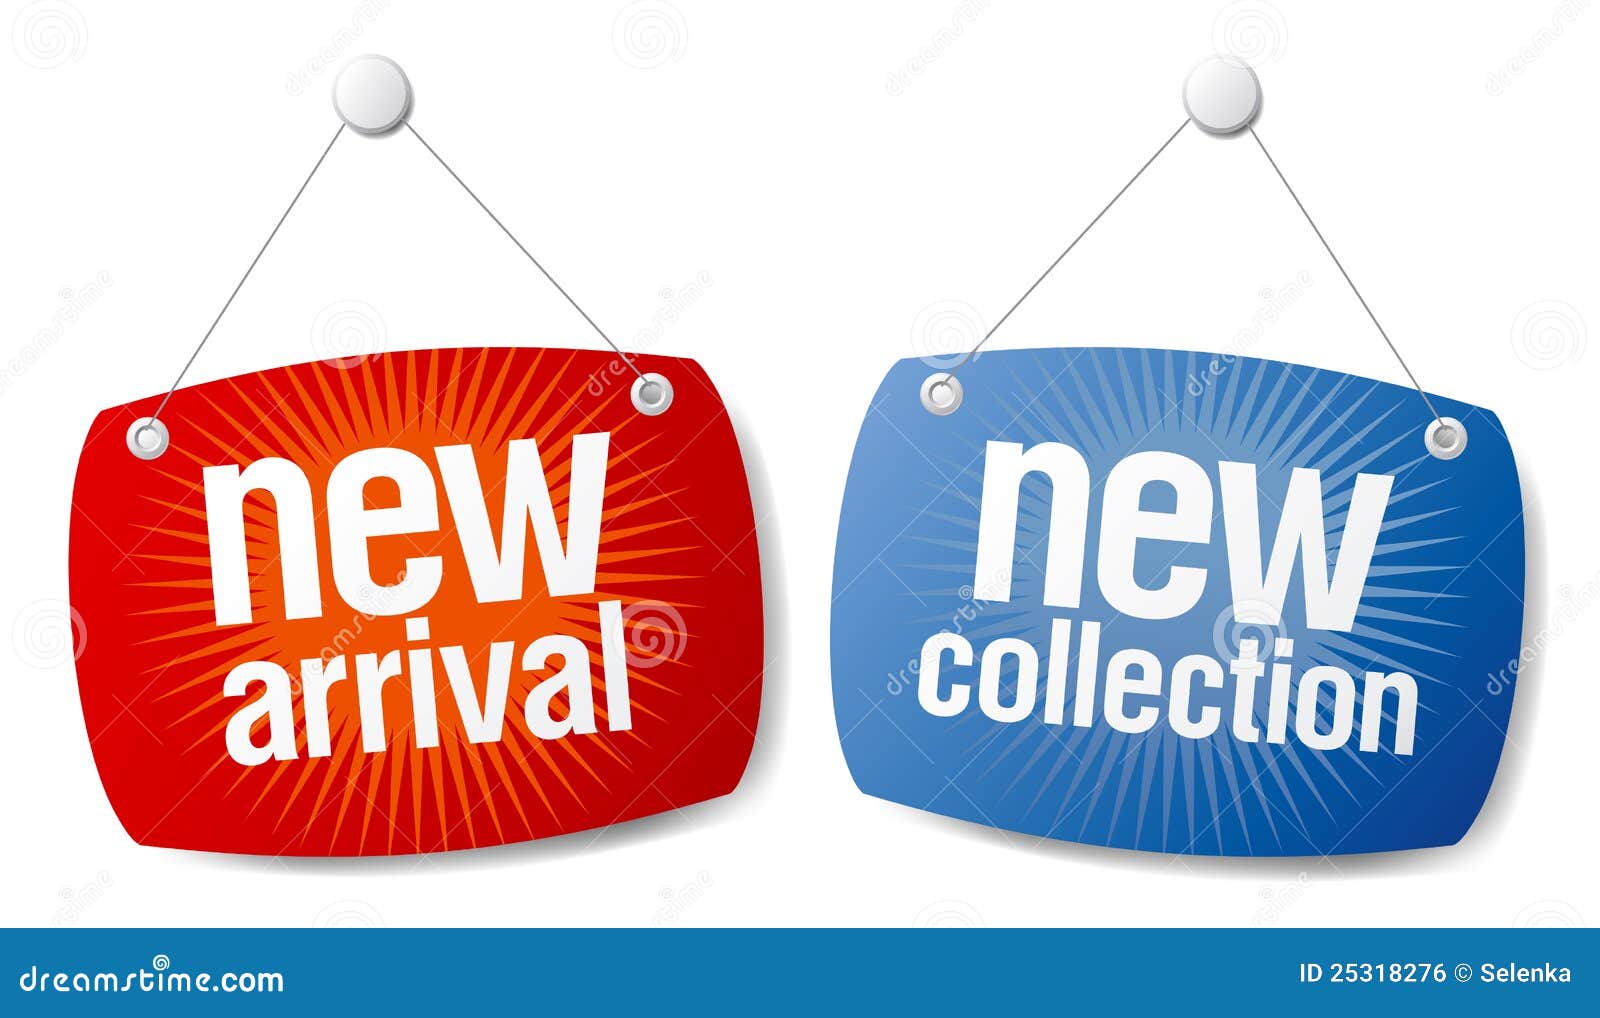 new arrival clipart - photo #24